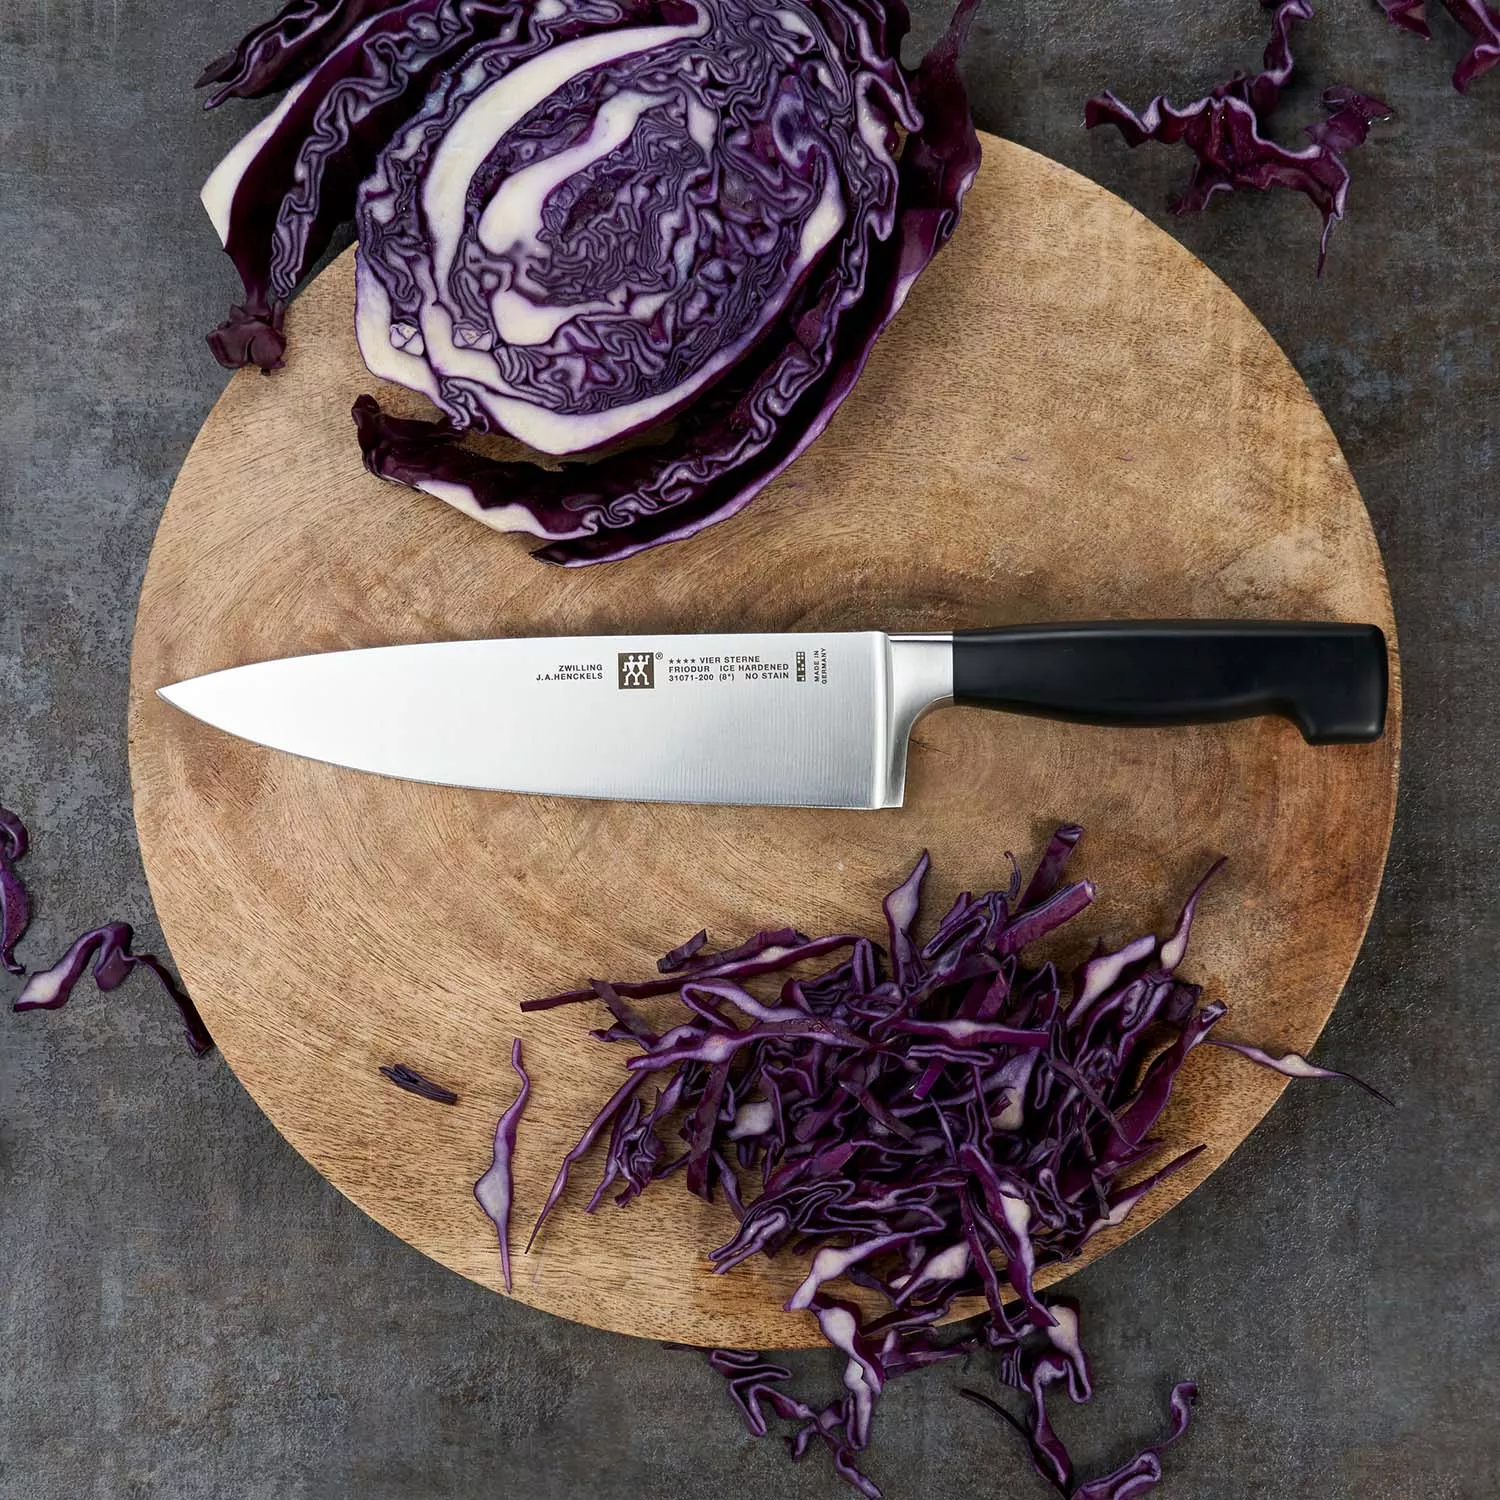 ZWILLING J.A. Henckels Four Star 8 Chef's Knife 